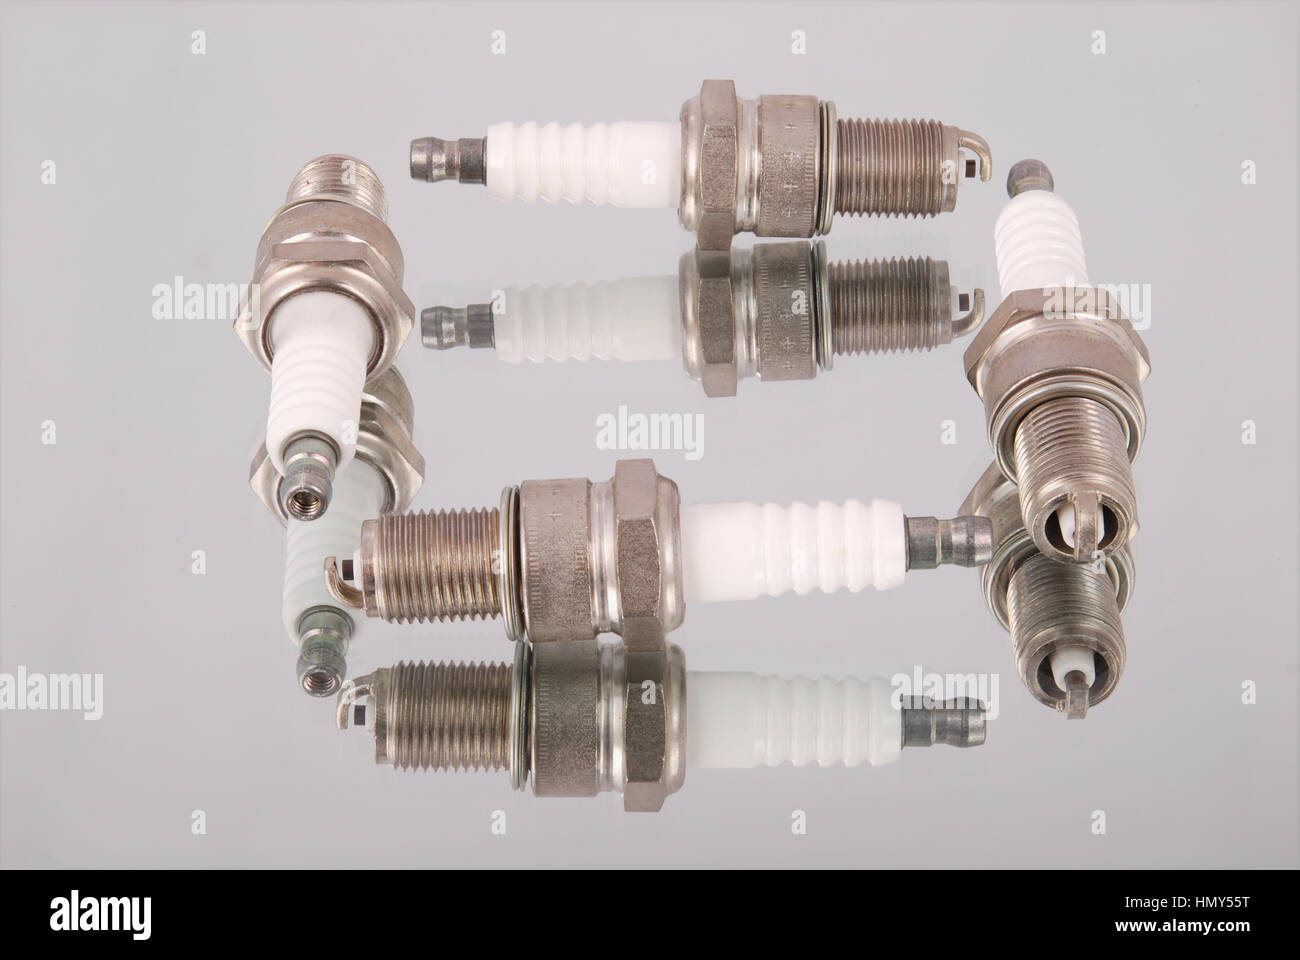 Four new spark plugs on a mirror background Stock Photo